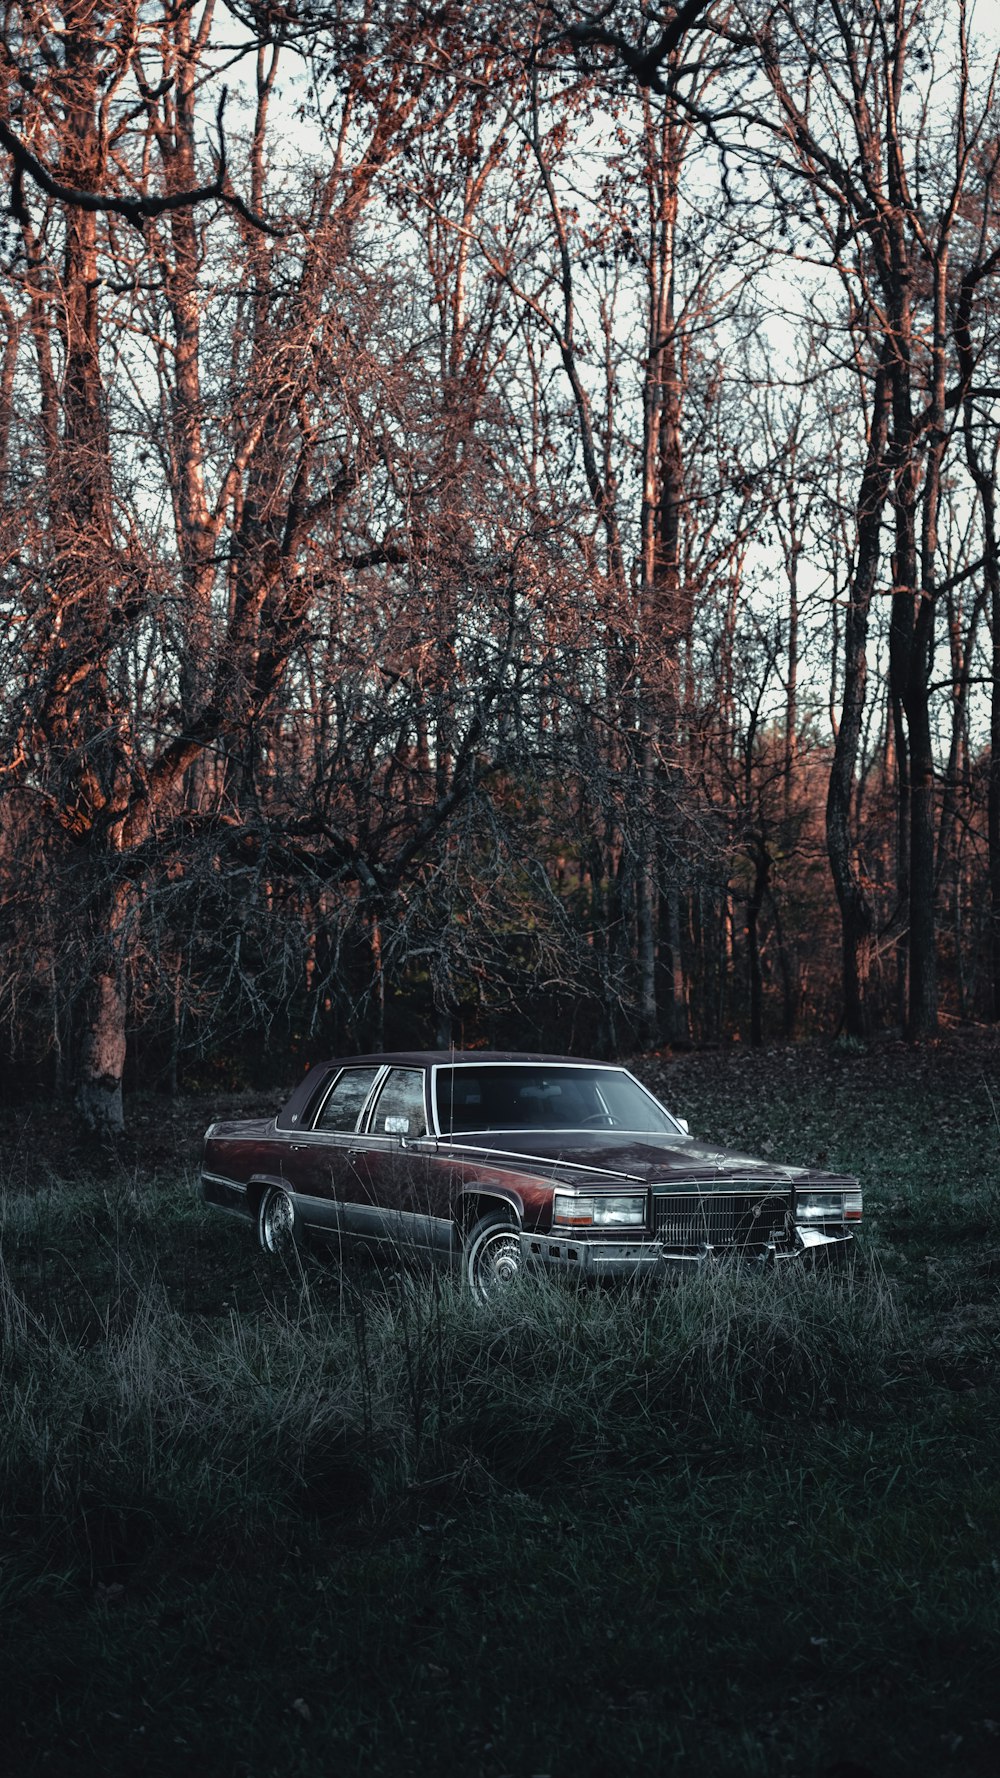 a car parked in a field with trees around it